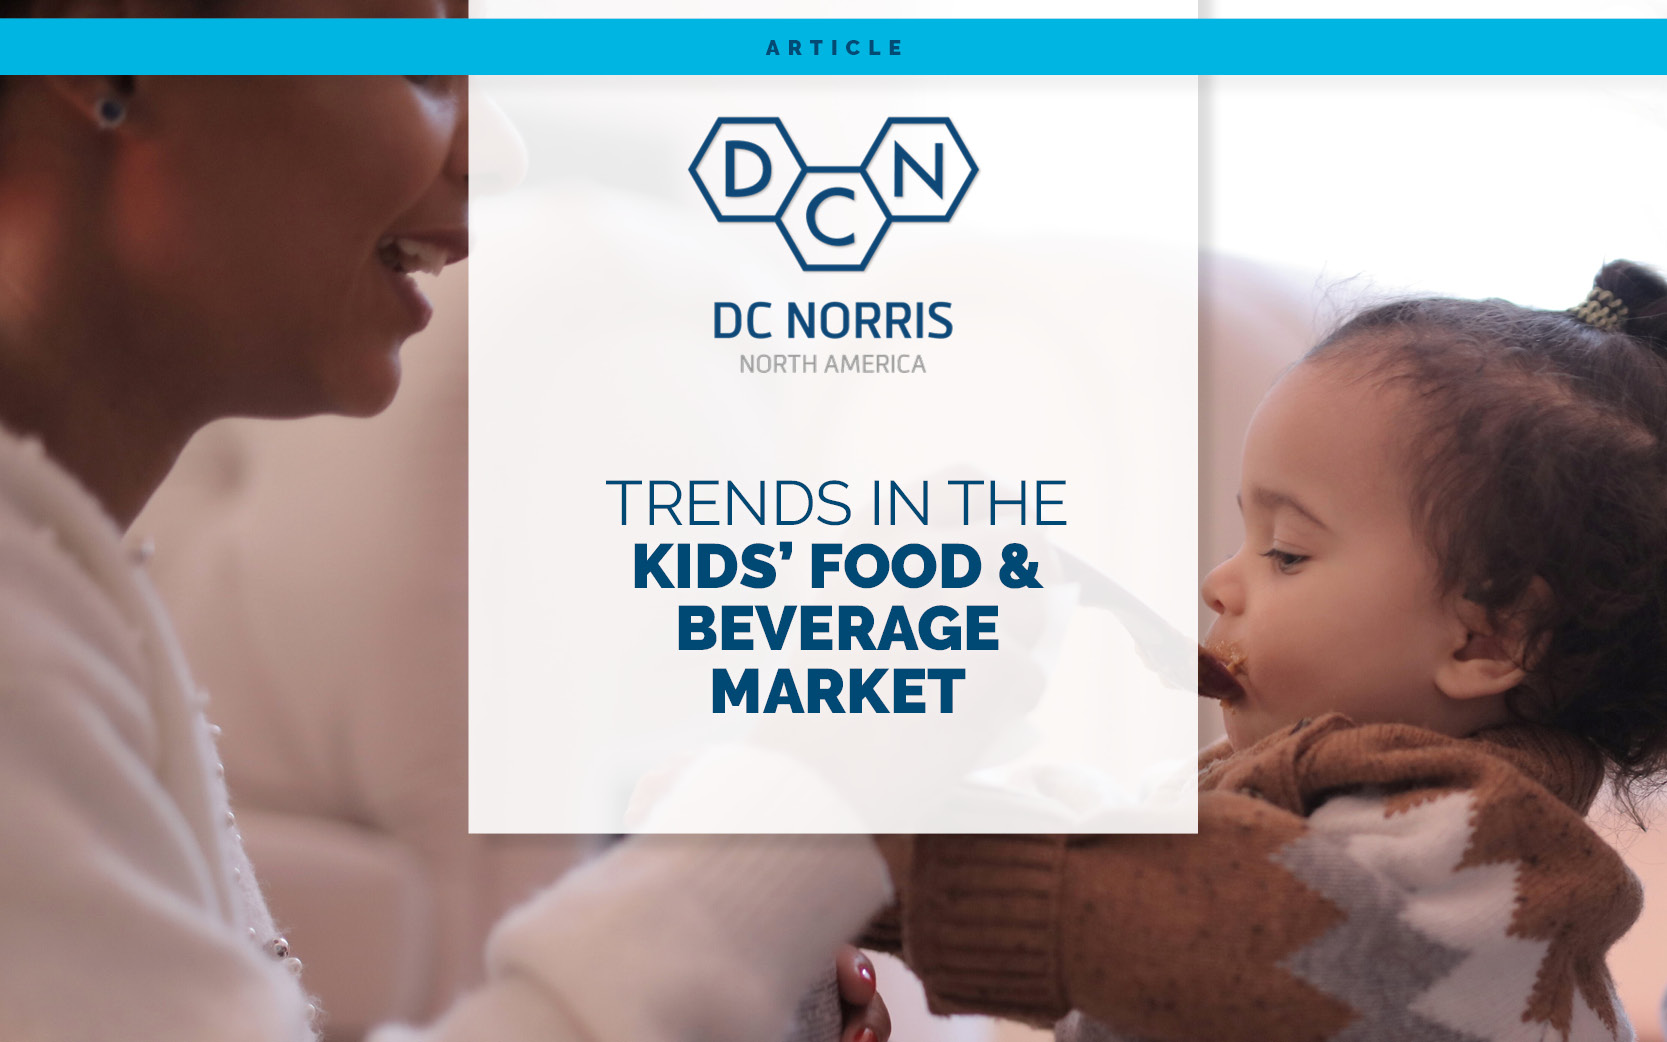 an image of a mother feeding her young child from a spoon makes up the background image. There is a headline that reads 'trends in the kids' food & beverage market' below the DC Norris North America logo